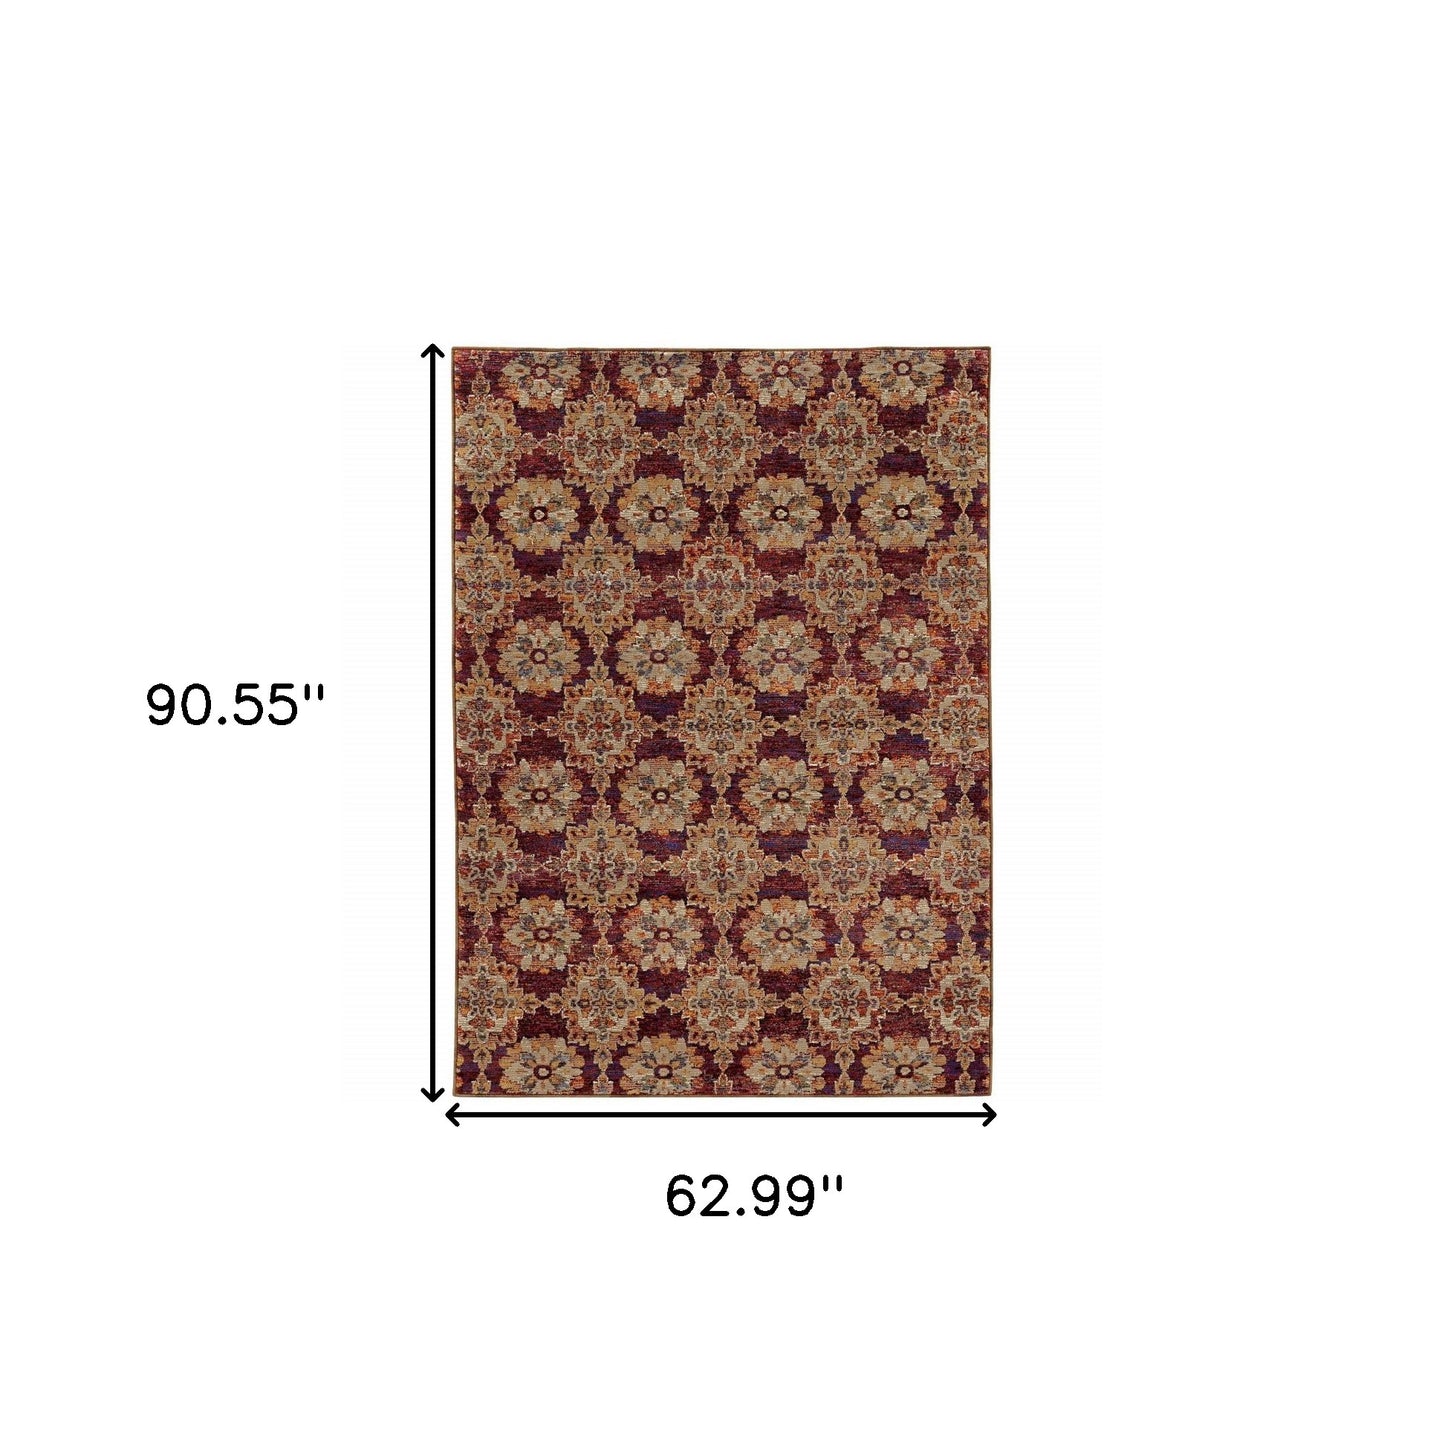 5' x 7' Red and Gold Oriental Power Loom Area Rug